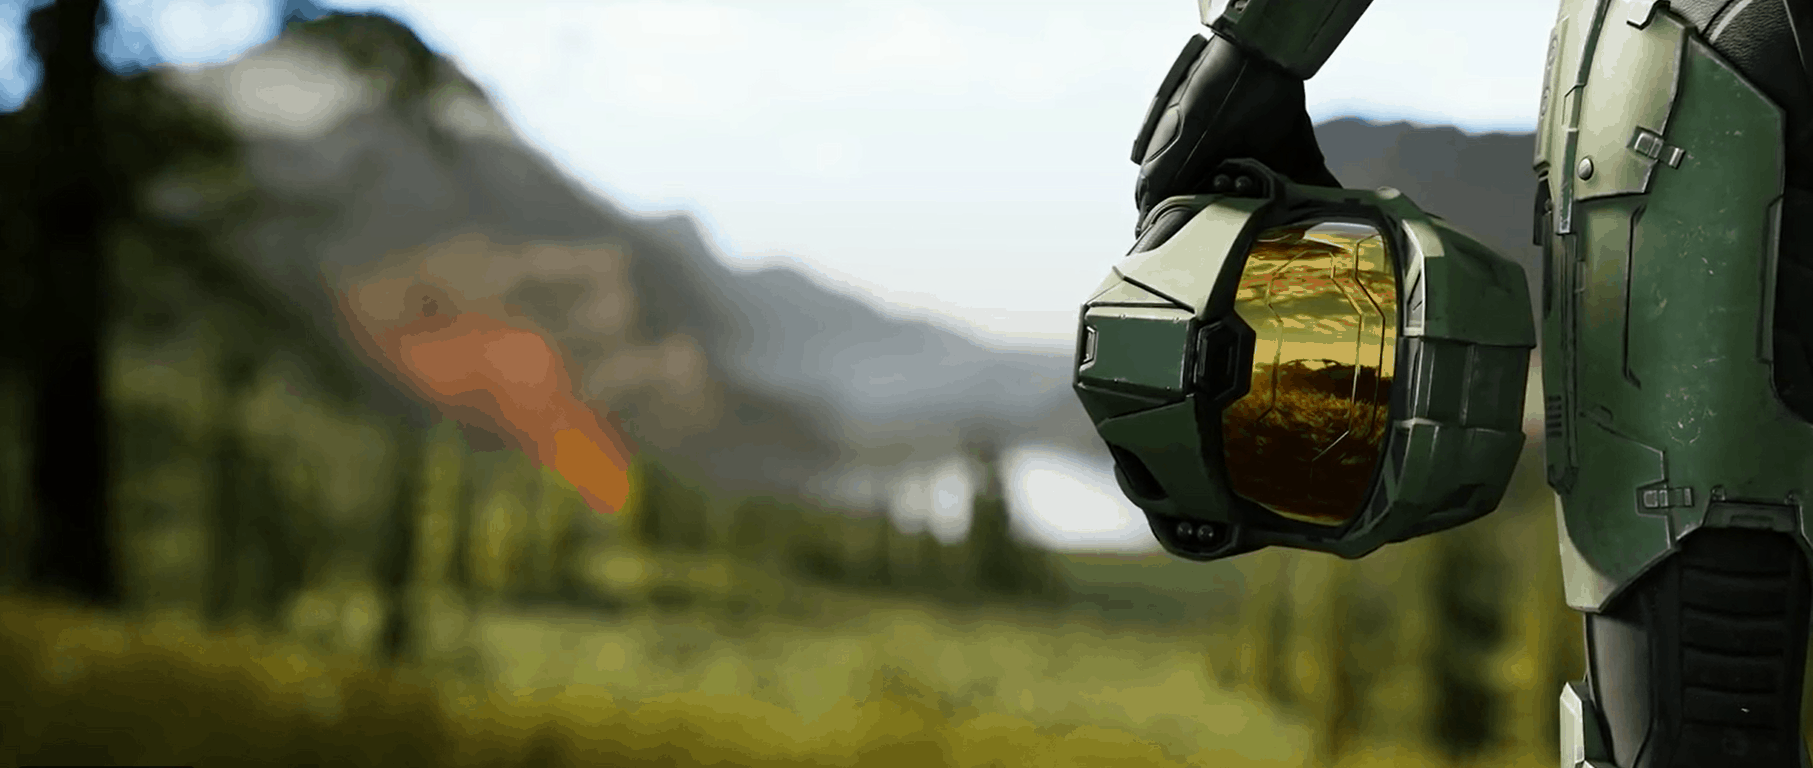 Halo: infinite being built with slipspace, microsoft's new gaming engine - onmsft. Com - june 11, 2018